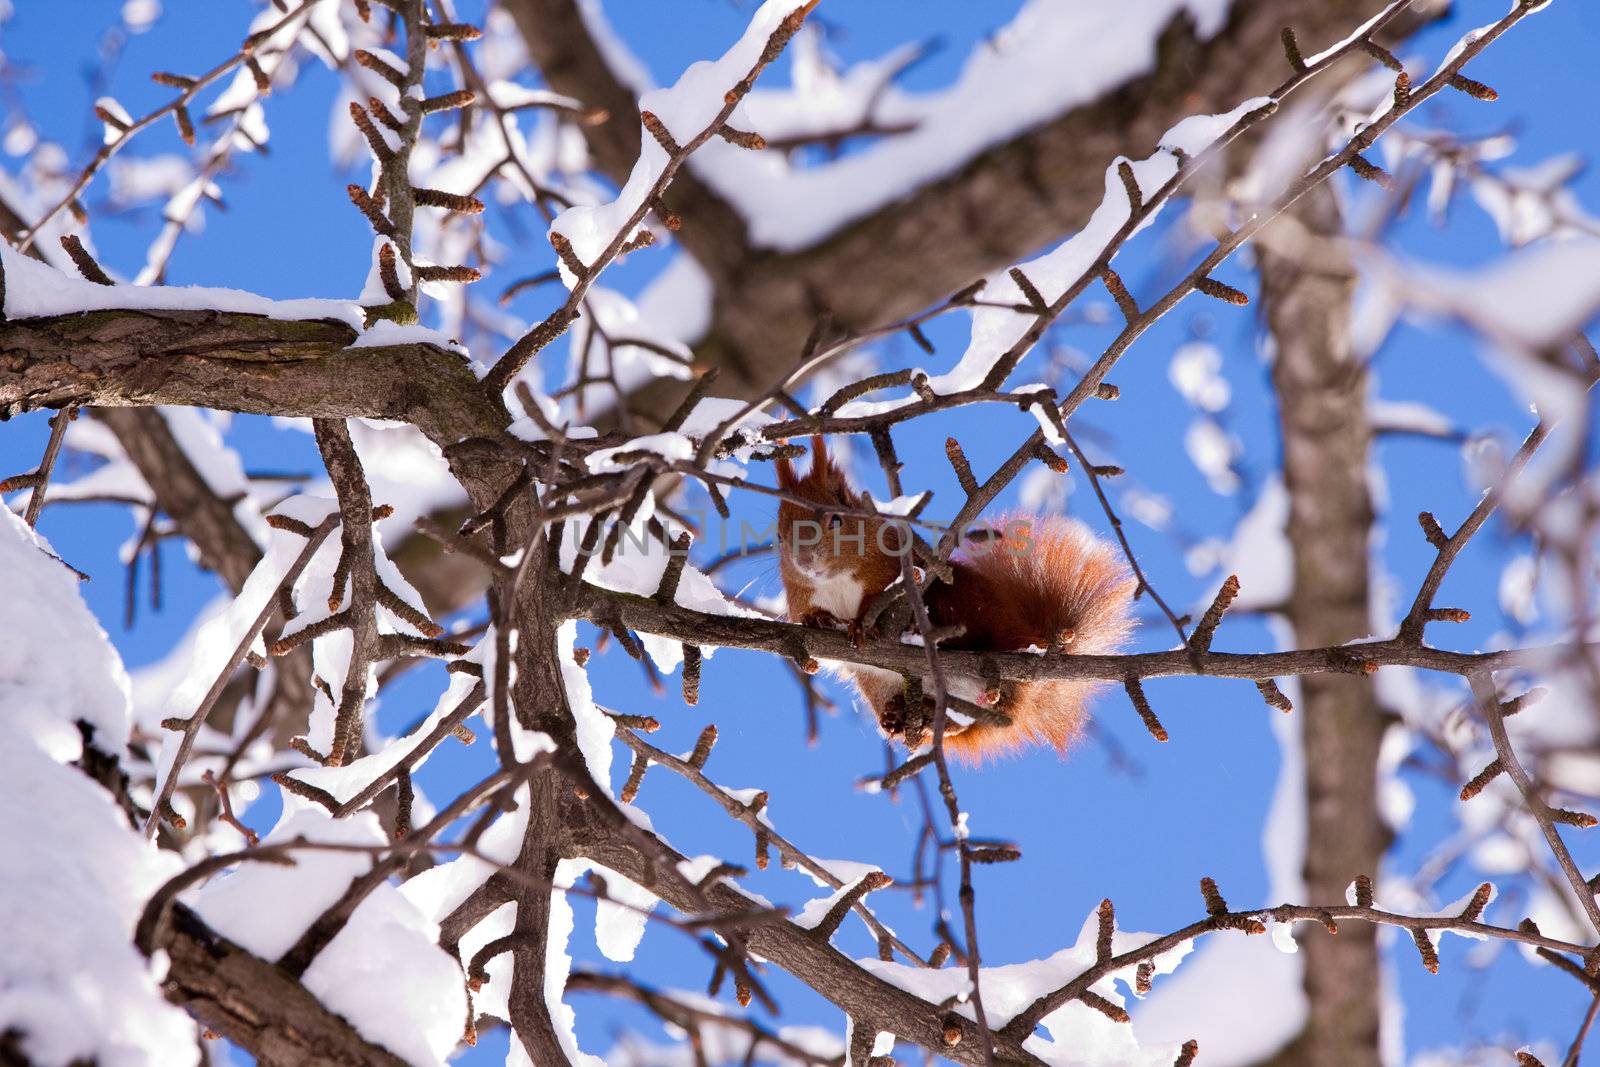 Red squirrel on the snowy branch